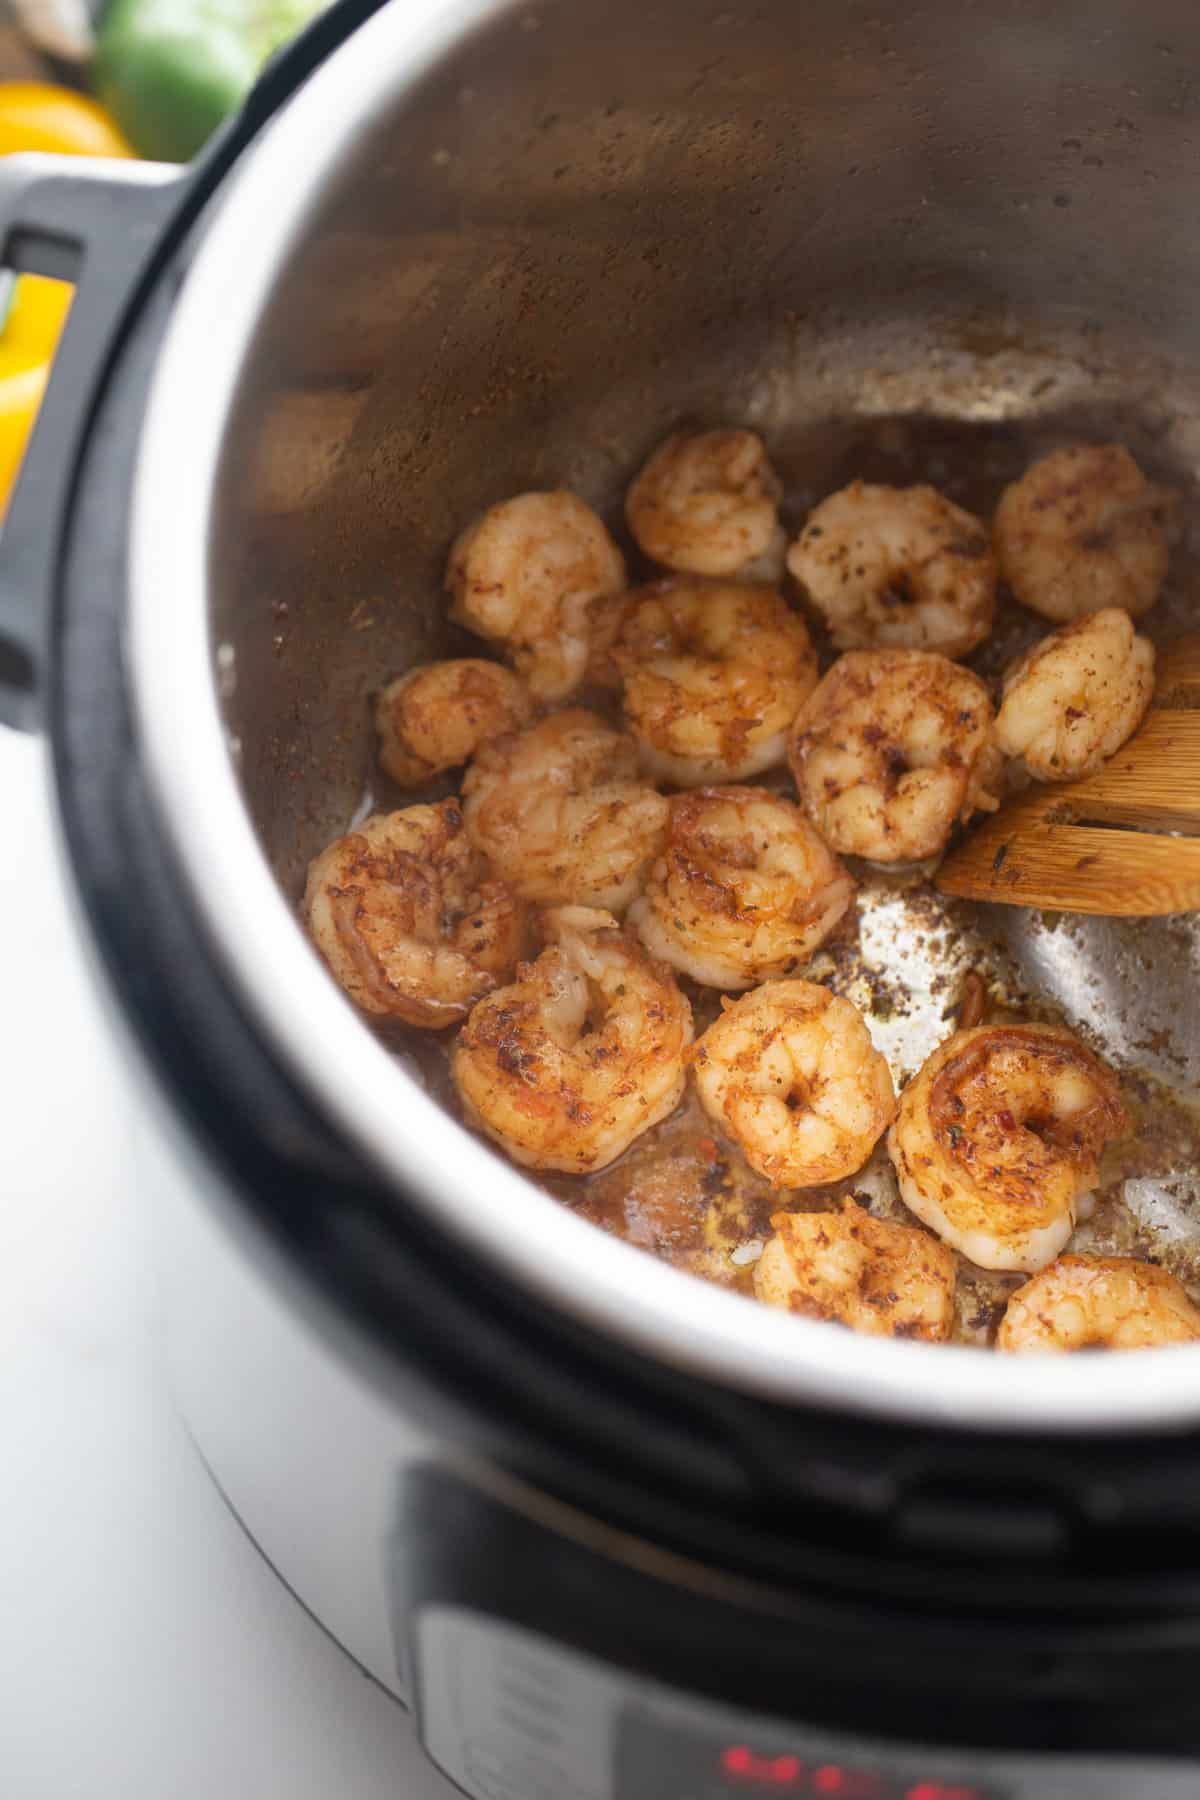 Shrimp cooked using the saute setting of a pressure cooker.